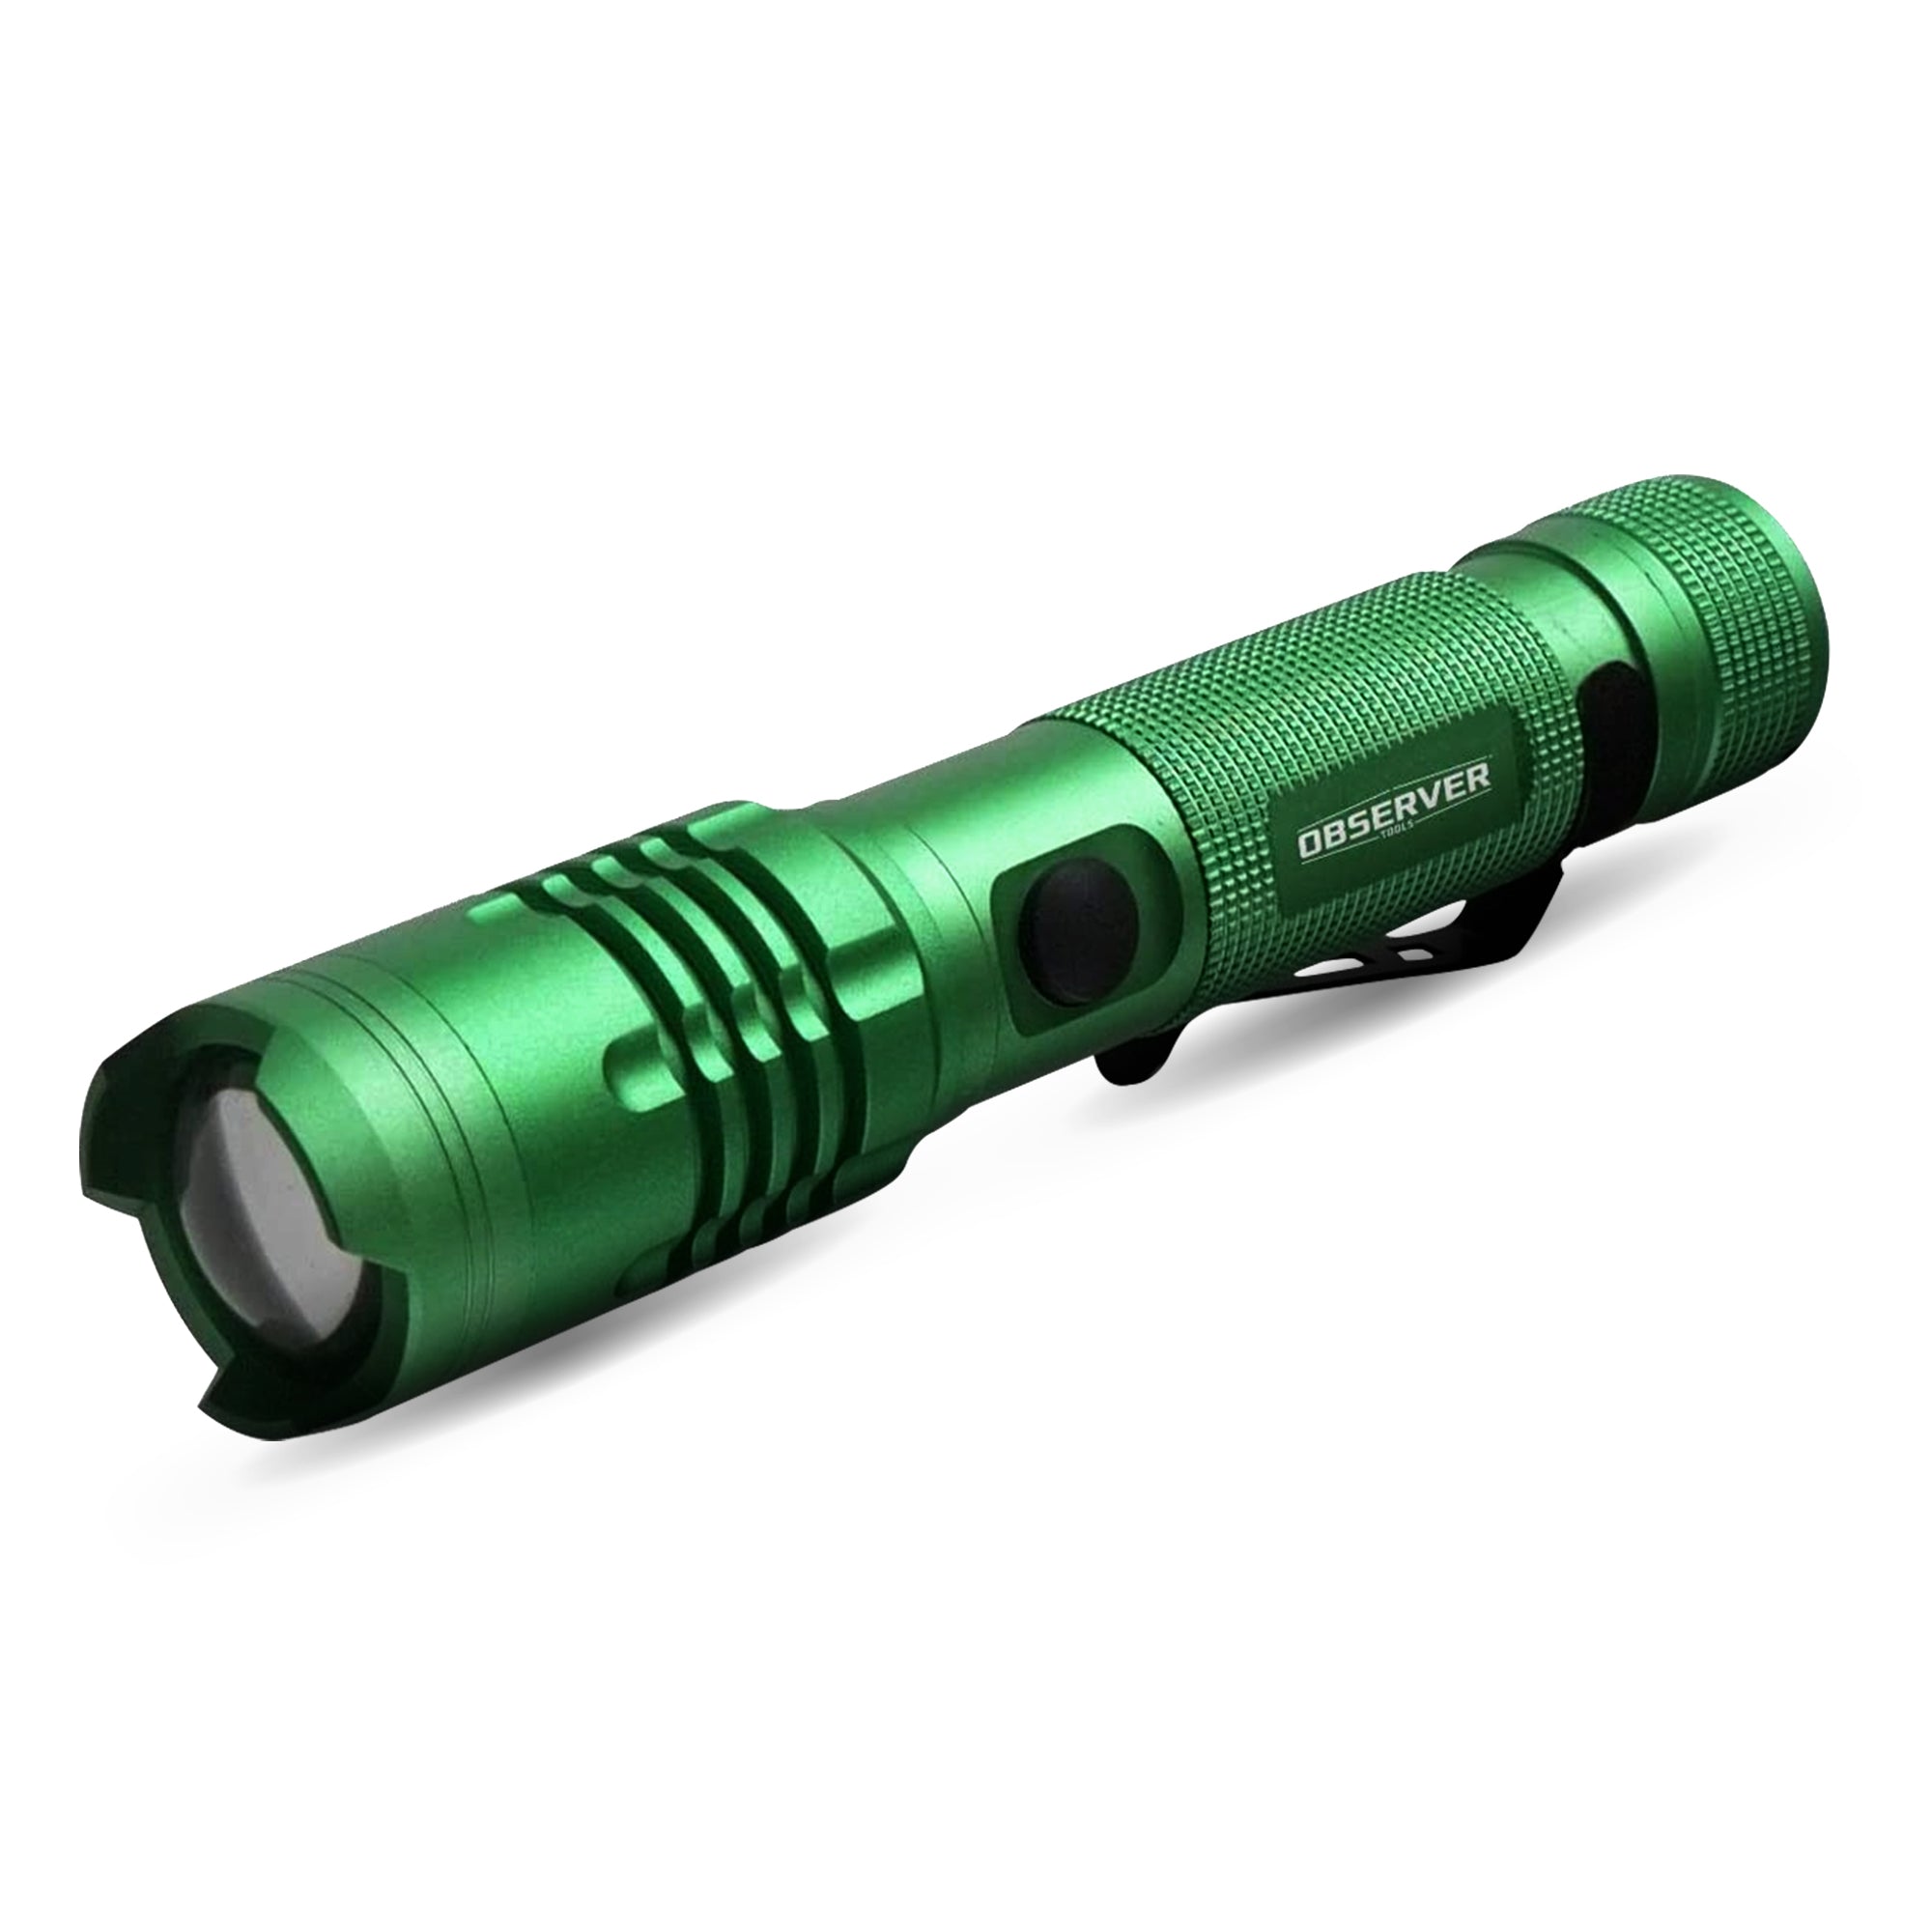 Bundle of 1200 Lumen Tactical LED Rechargeable Flashlight with Power Bank & Dual Power